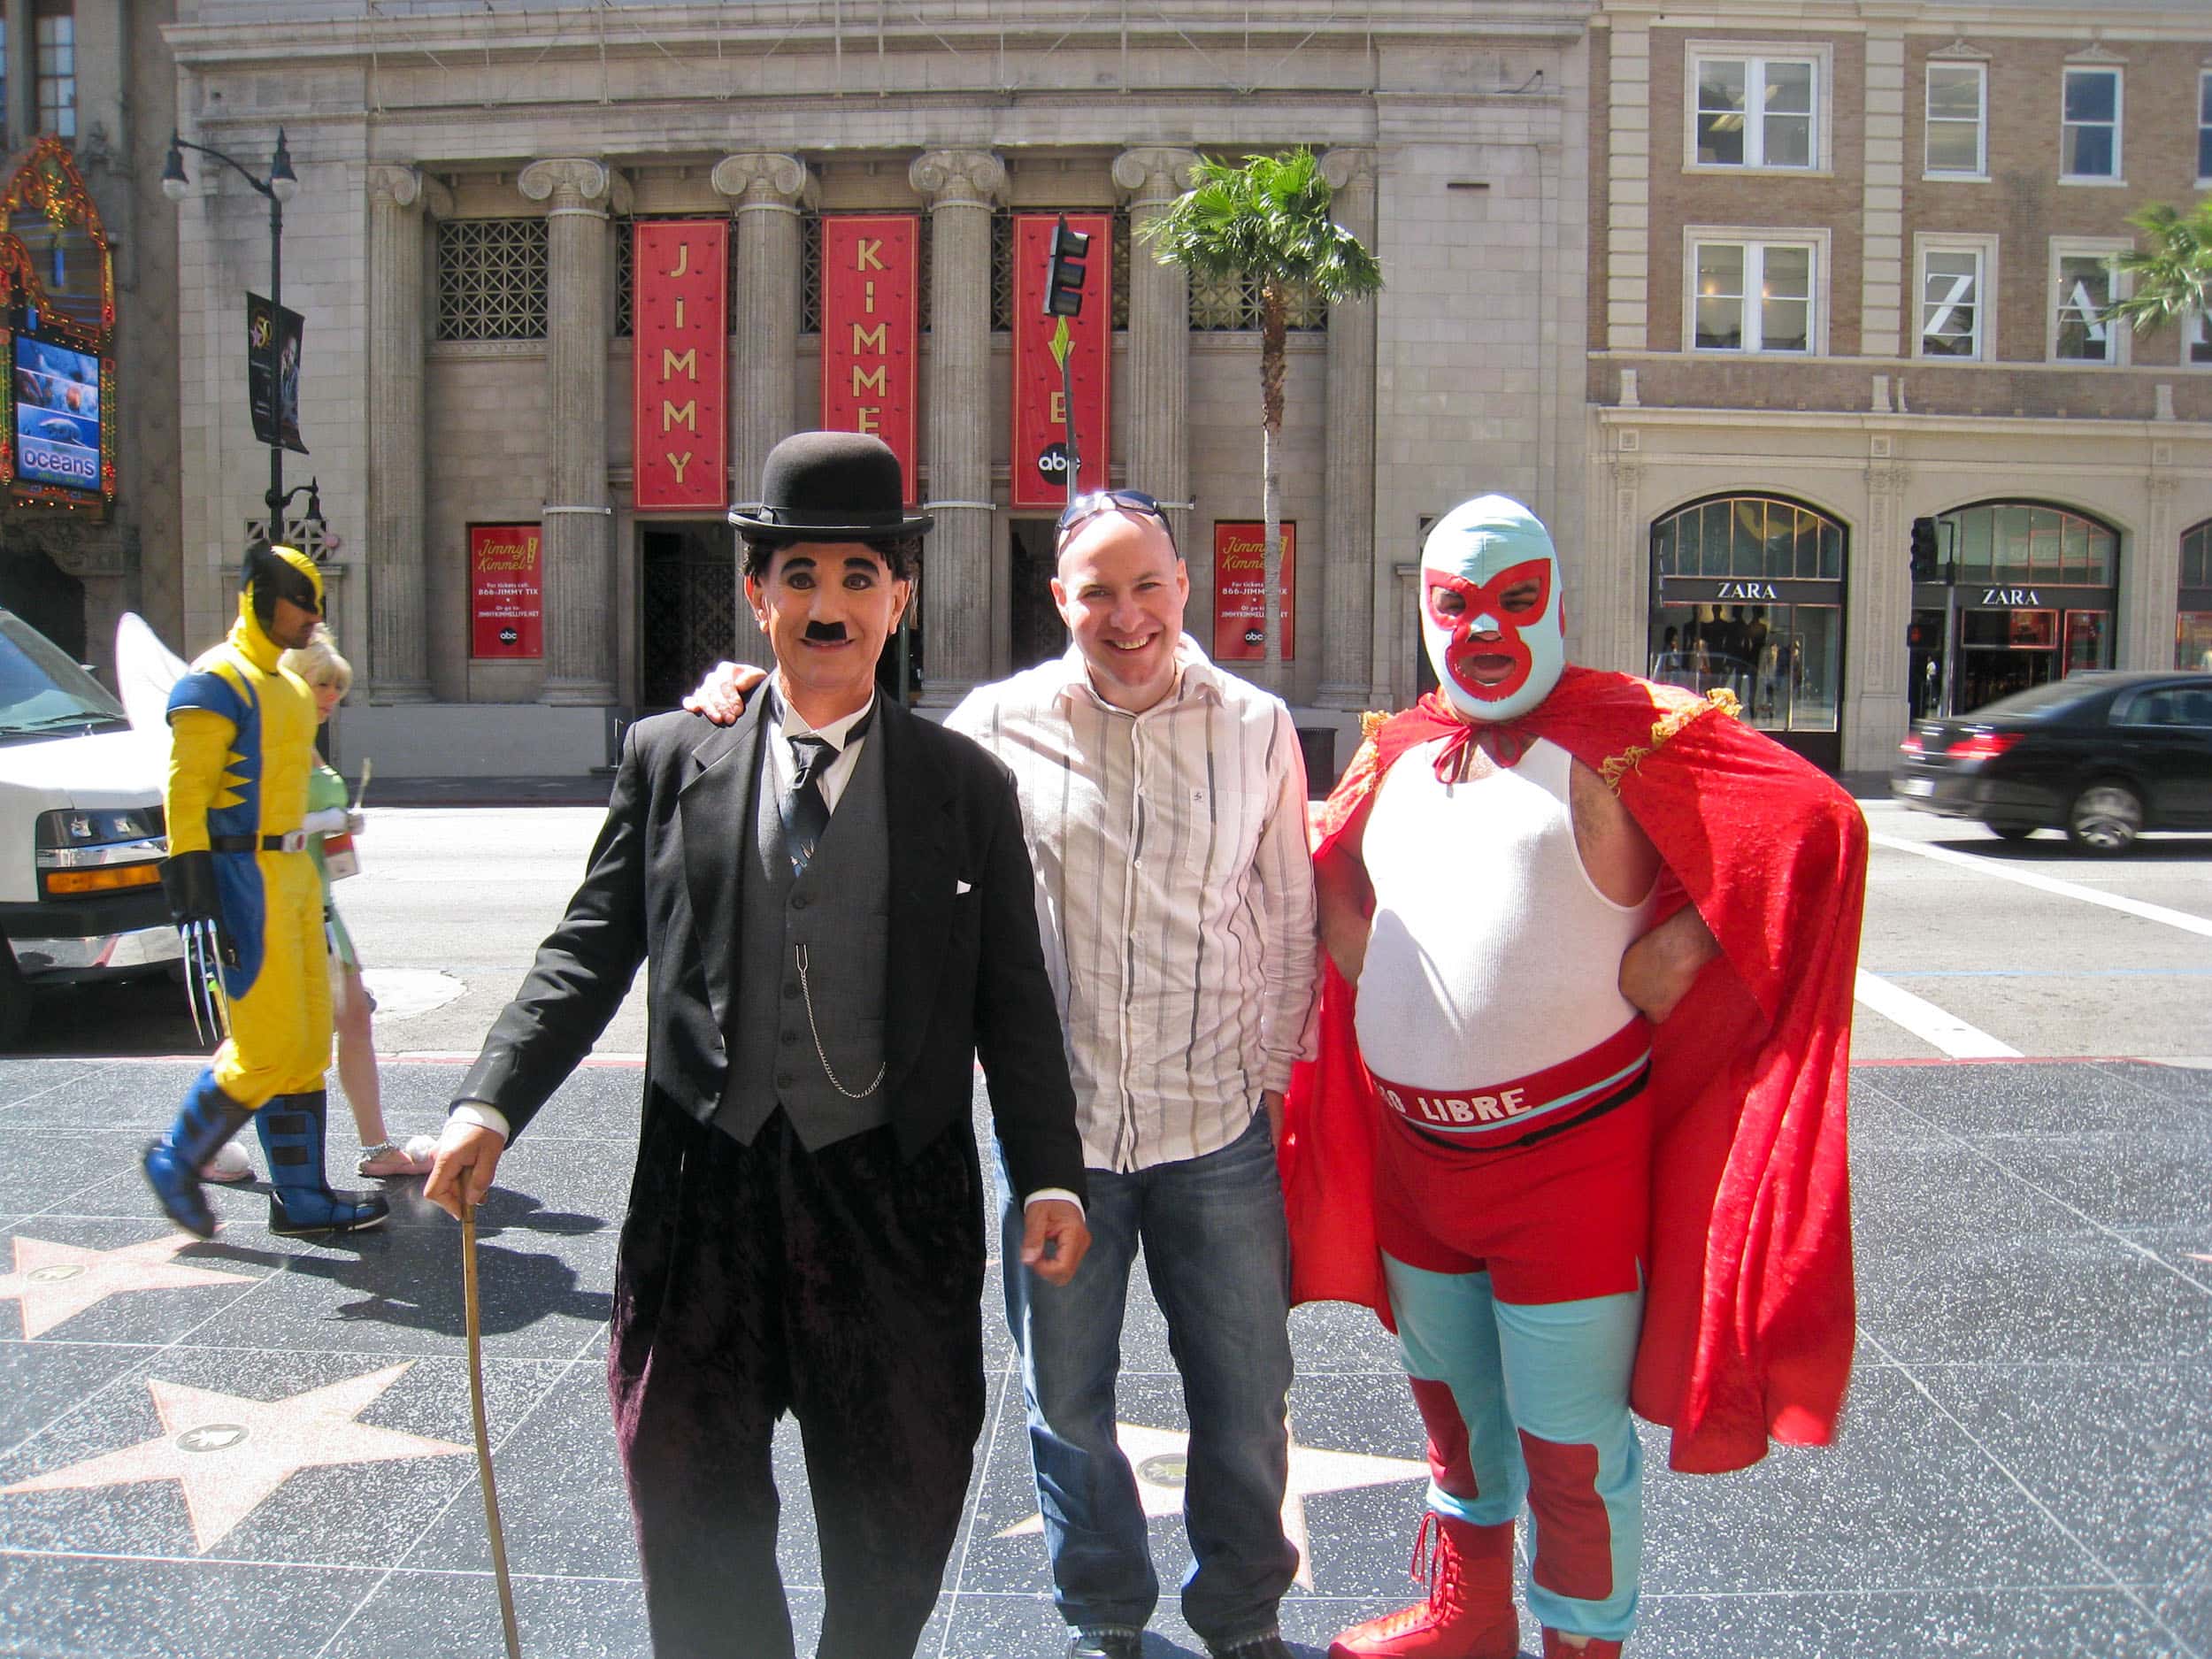 Goofing around with Charlie Chaplin and Nacho Libre